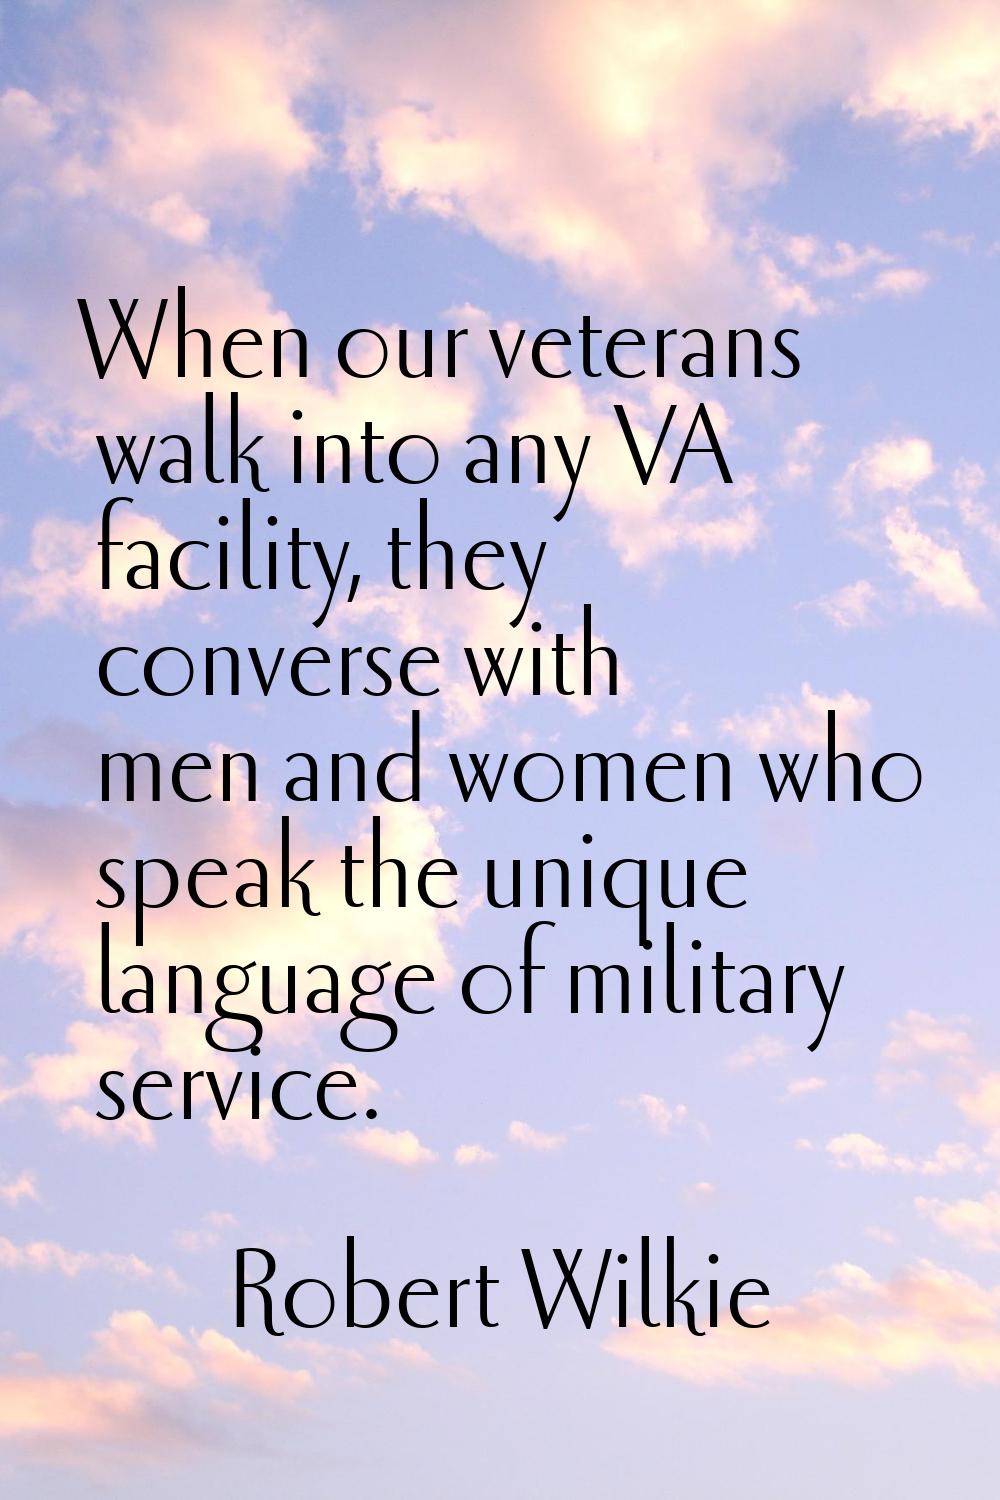 When our veterans walk into any VA facility, they converse with men and women who speak the unique 